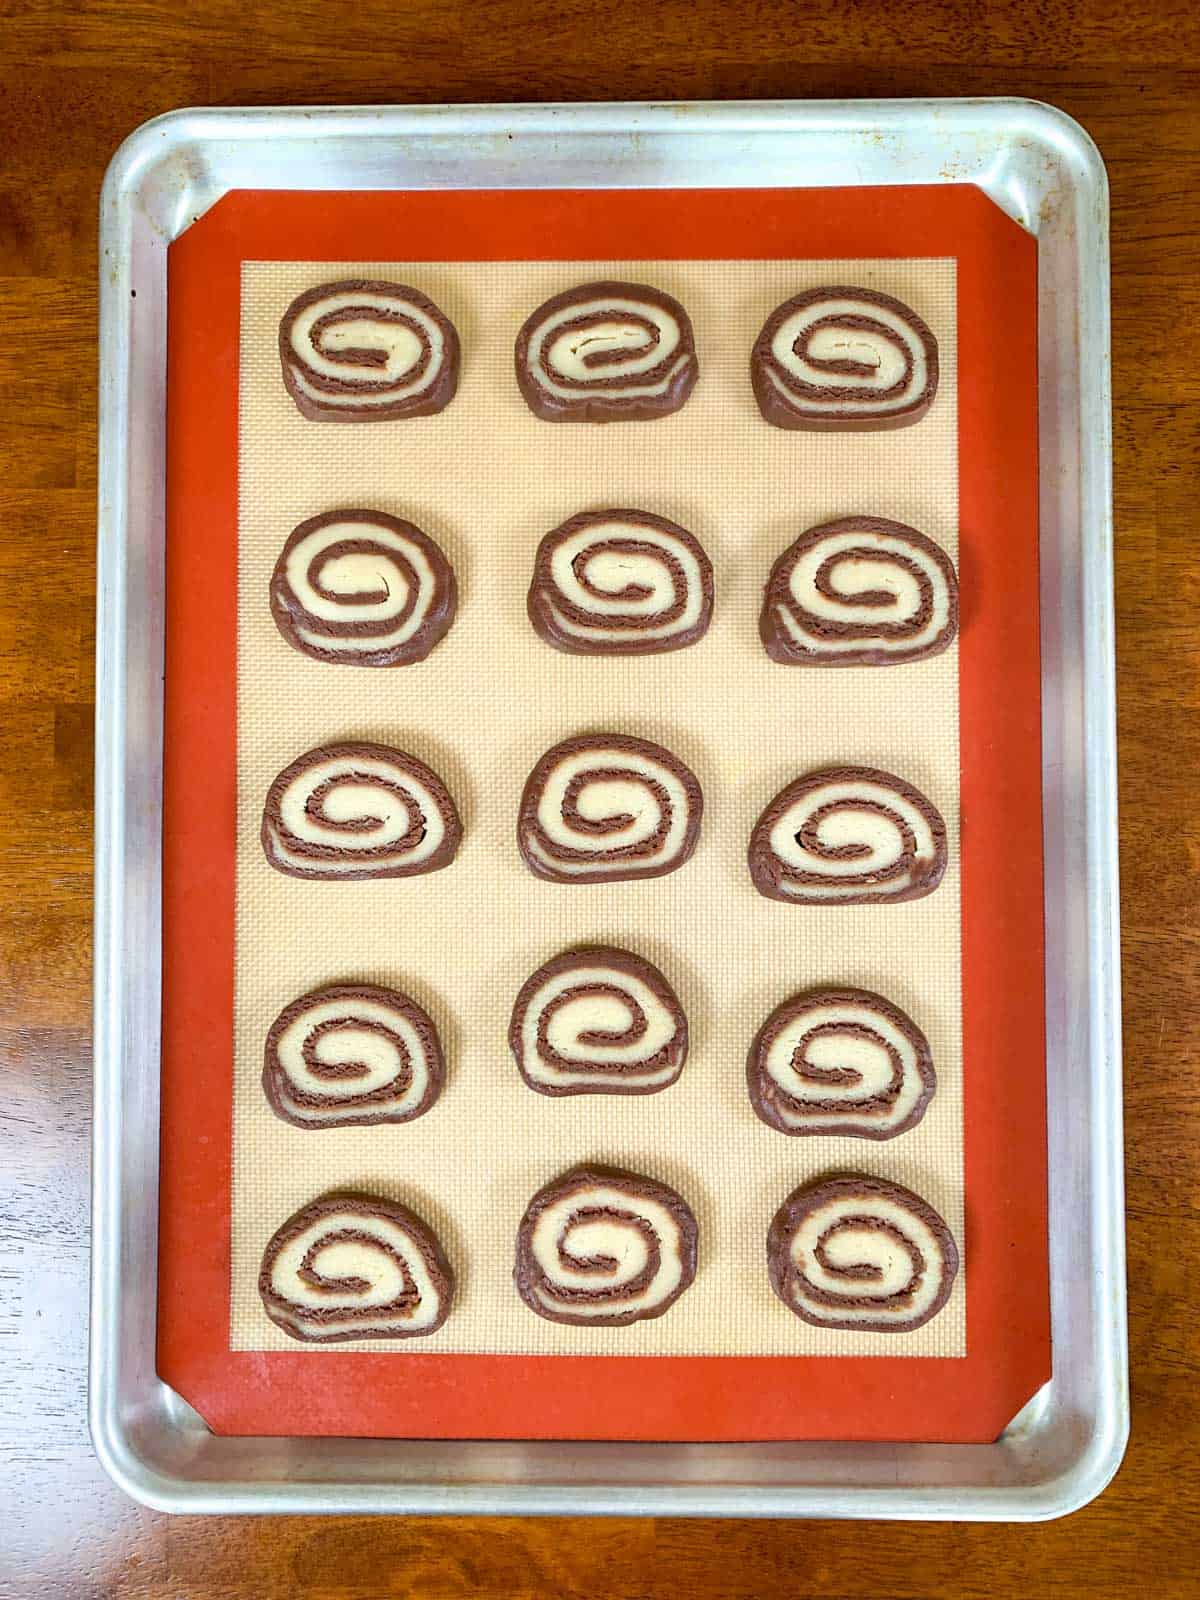 12 cut pinwheel cookies placed on a silicone mat in a baking tray.